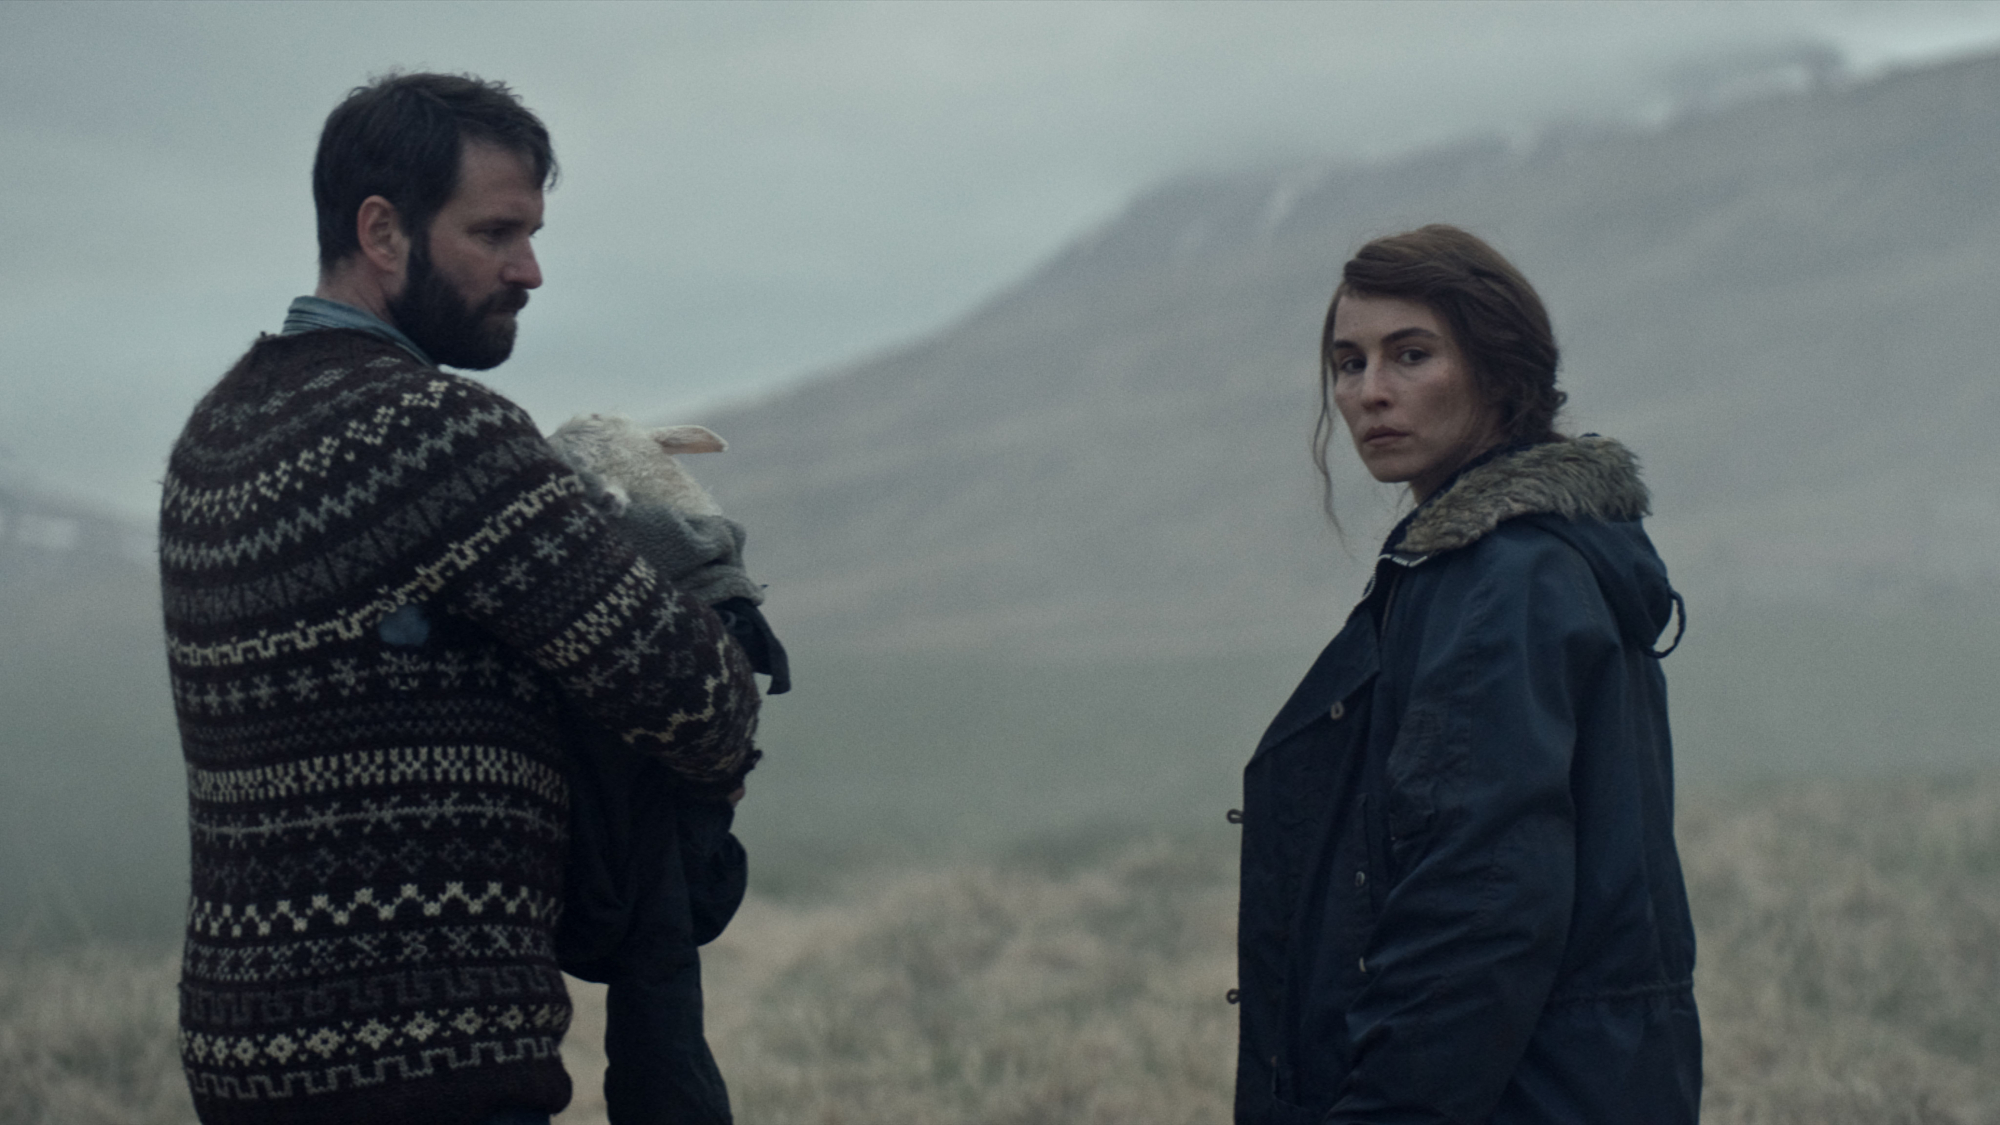 'Lamb' actors Hilmir Snær Guðnason as Ingvar and Noomi Rapace as Maria standing outside holding Ada